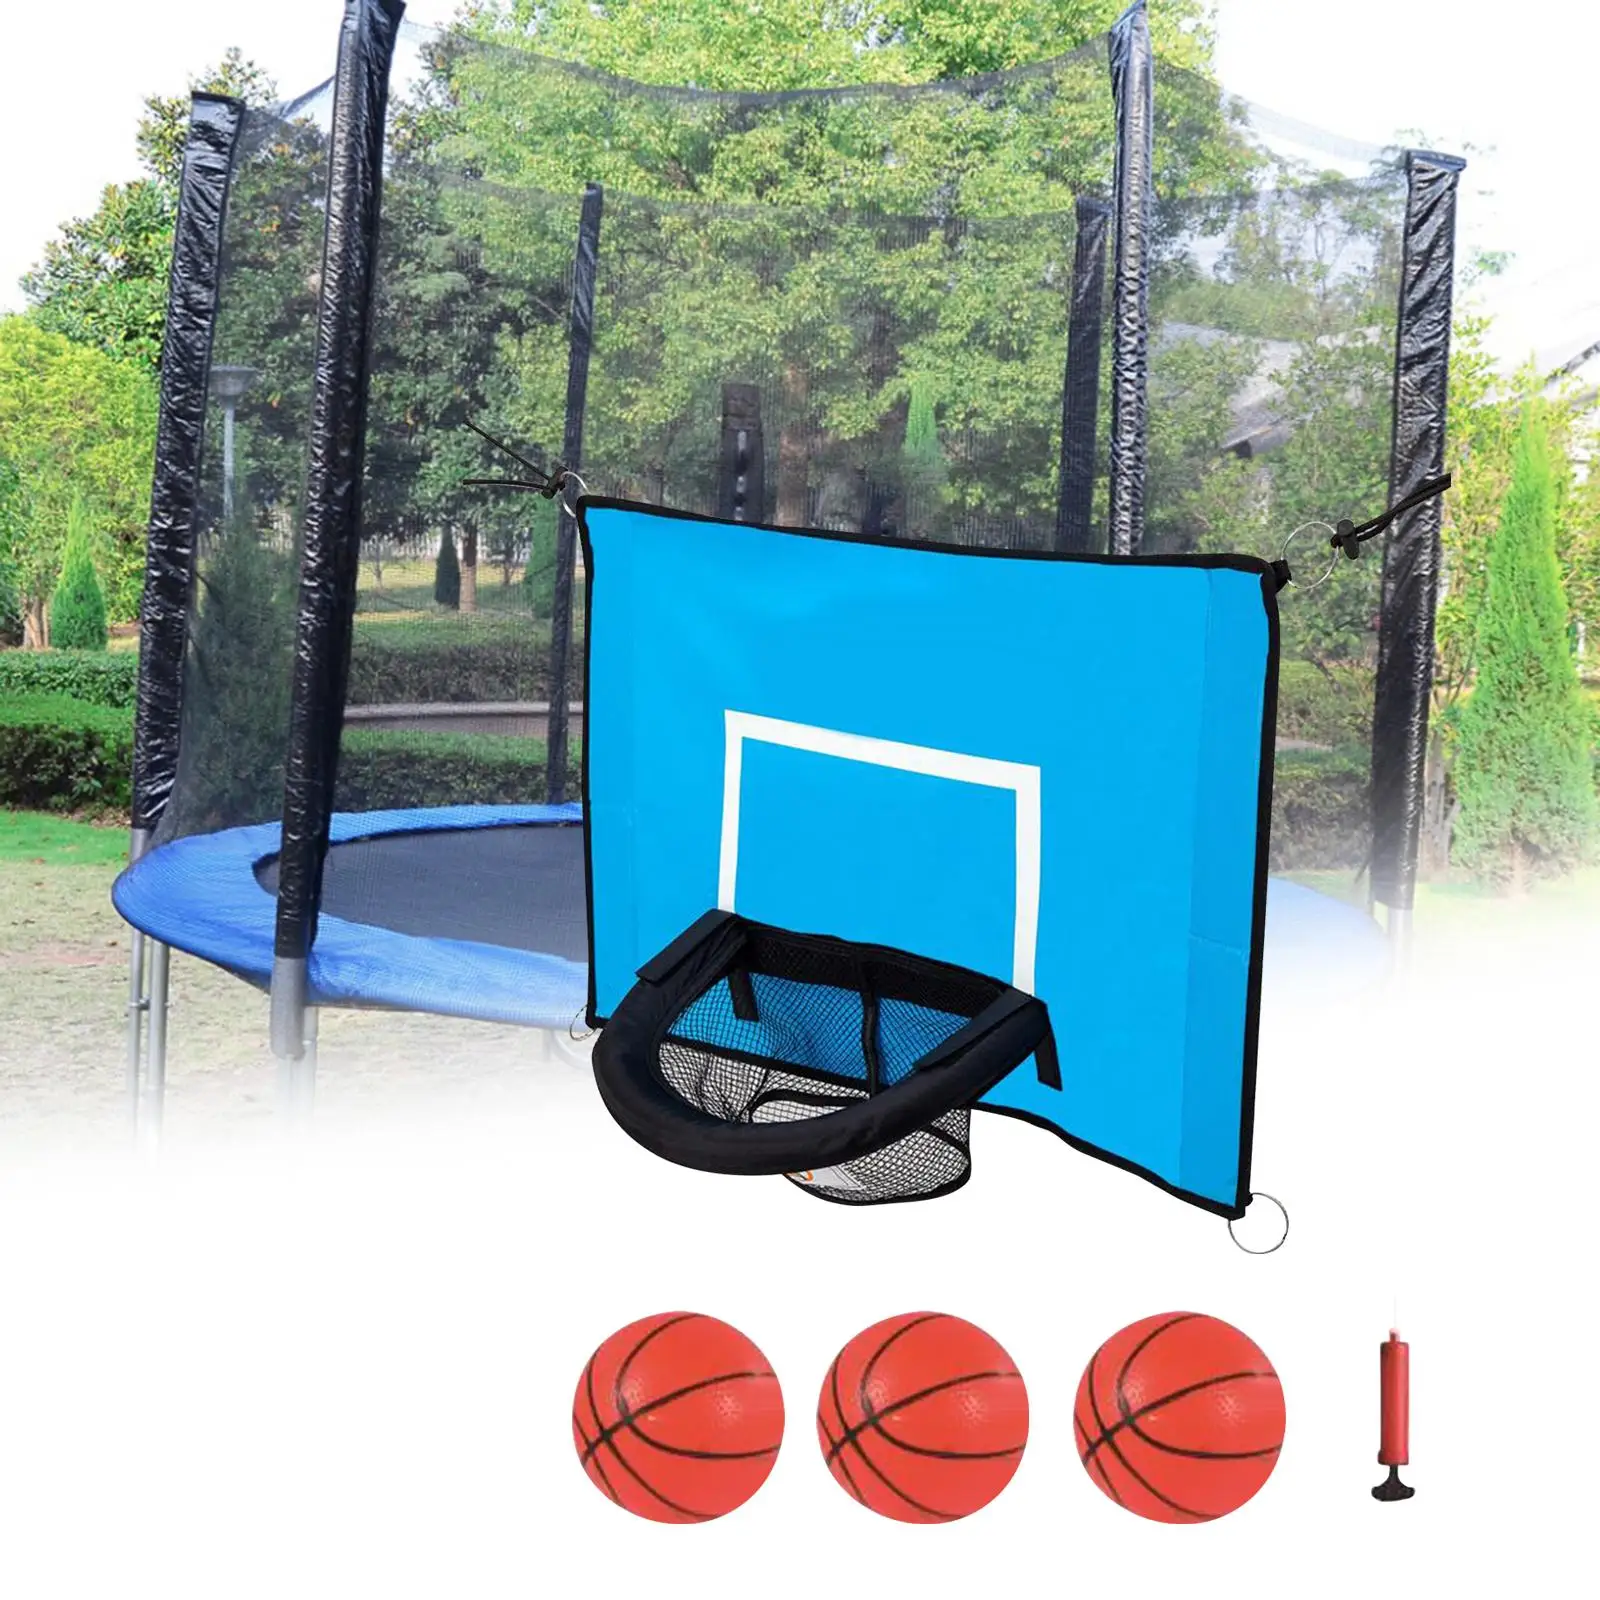 Trampolines Basketball Hoop Attachment Replacement Backyard for All Ages for Dunking Garden Indoor Outdoor Sports Universal